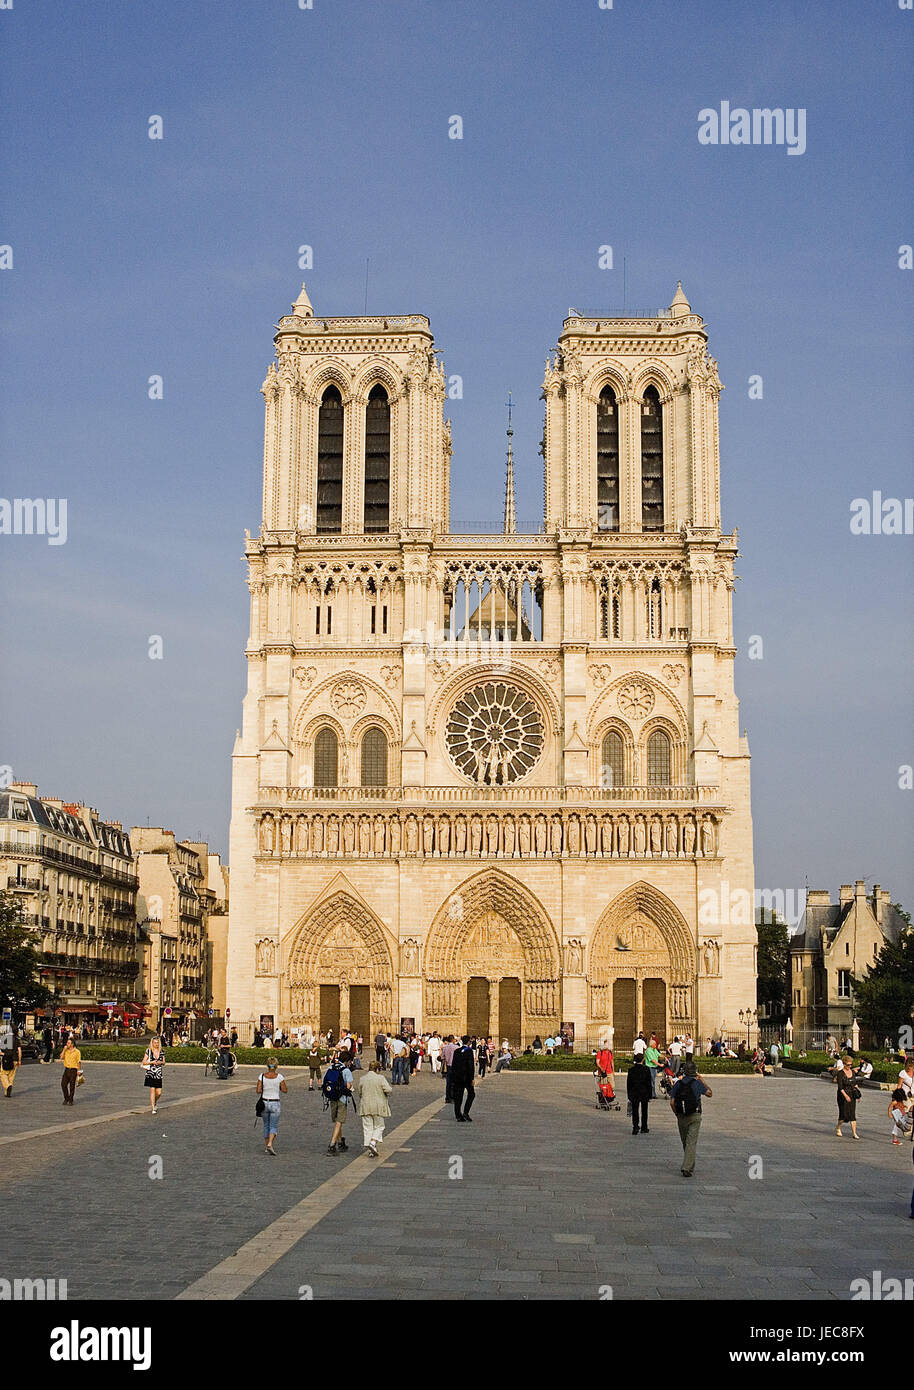 France, Paris, cathedral Notre lady, forecourt, tourist, capital, church, structure, Gothic, sacred construction, Notre lady's cathedral, architecture, place of interest, landmark, person, sightseeing, destination, tourism, city travel, Stock Photo